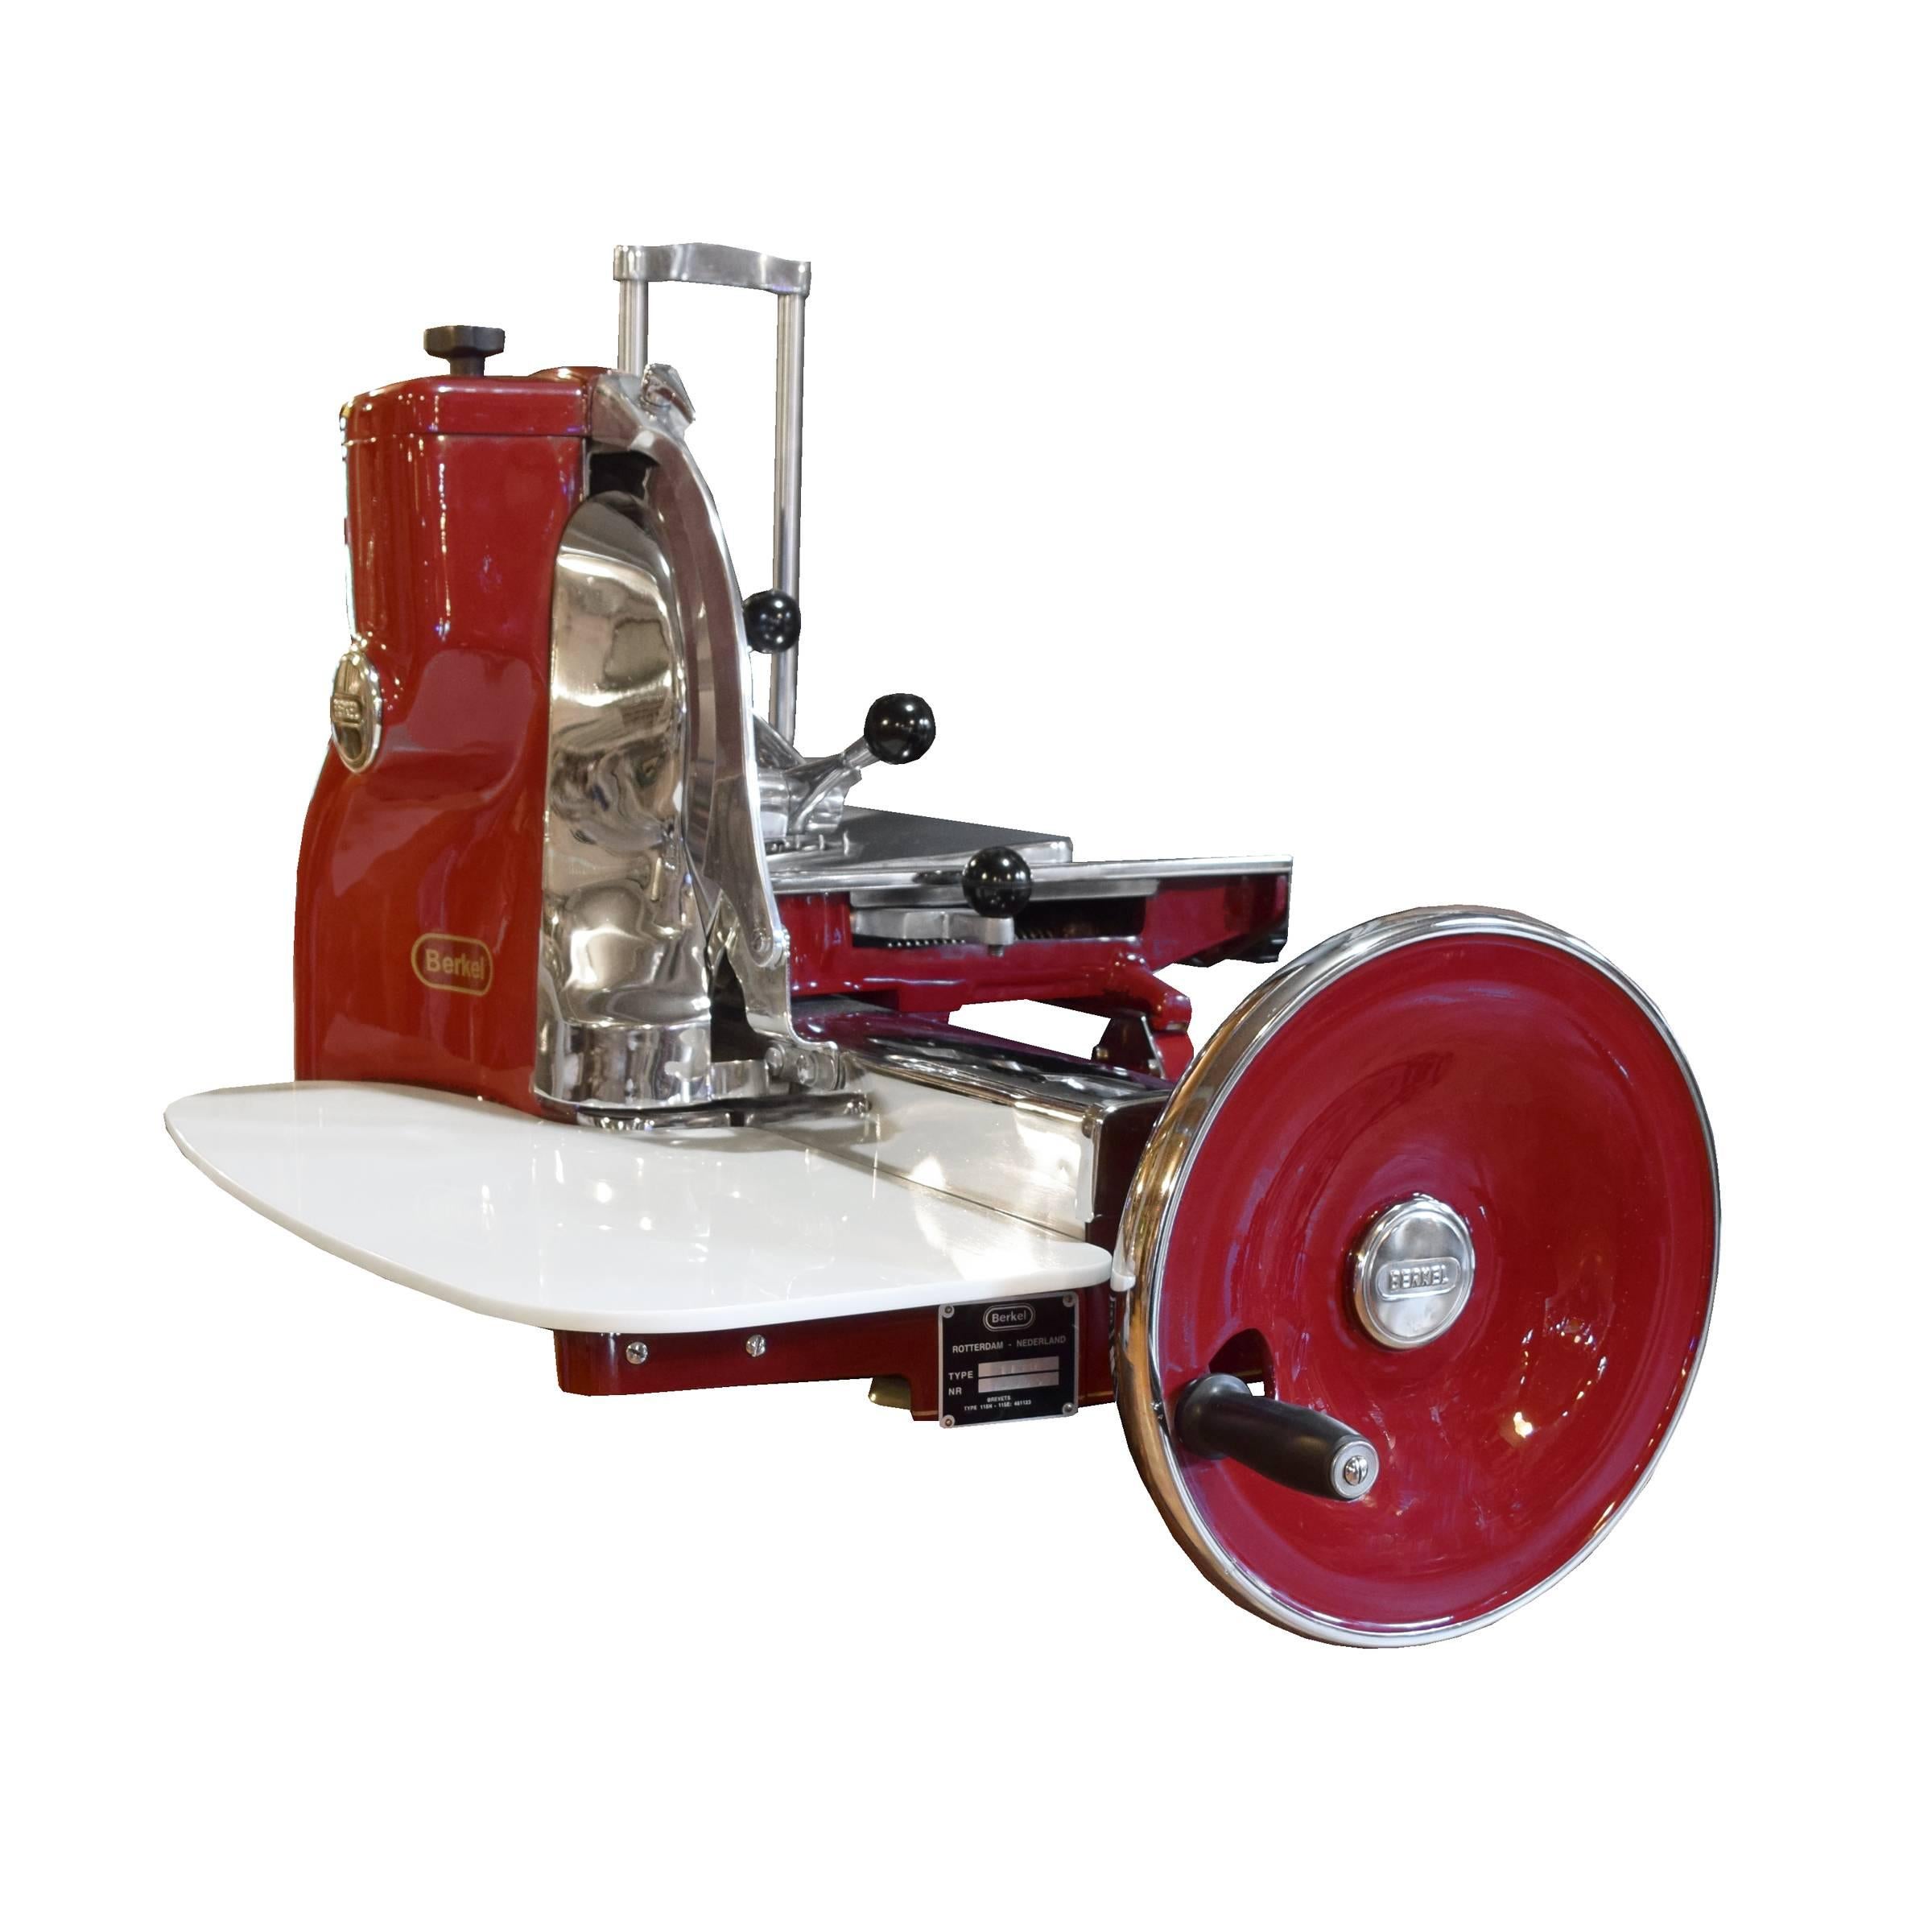 A rare Berkel model 115H meat slicer in red high gloss enamel, manufactured in Rotterdam, Holland. This model, manufactured from 1953-1980, is flywheel operated and features 15 different slicing thicknesses and a blade sharpener. This slicer has